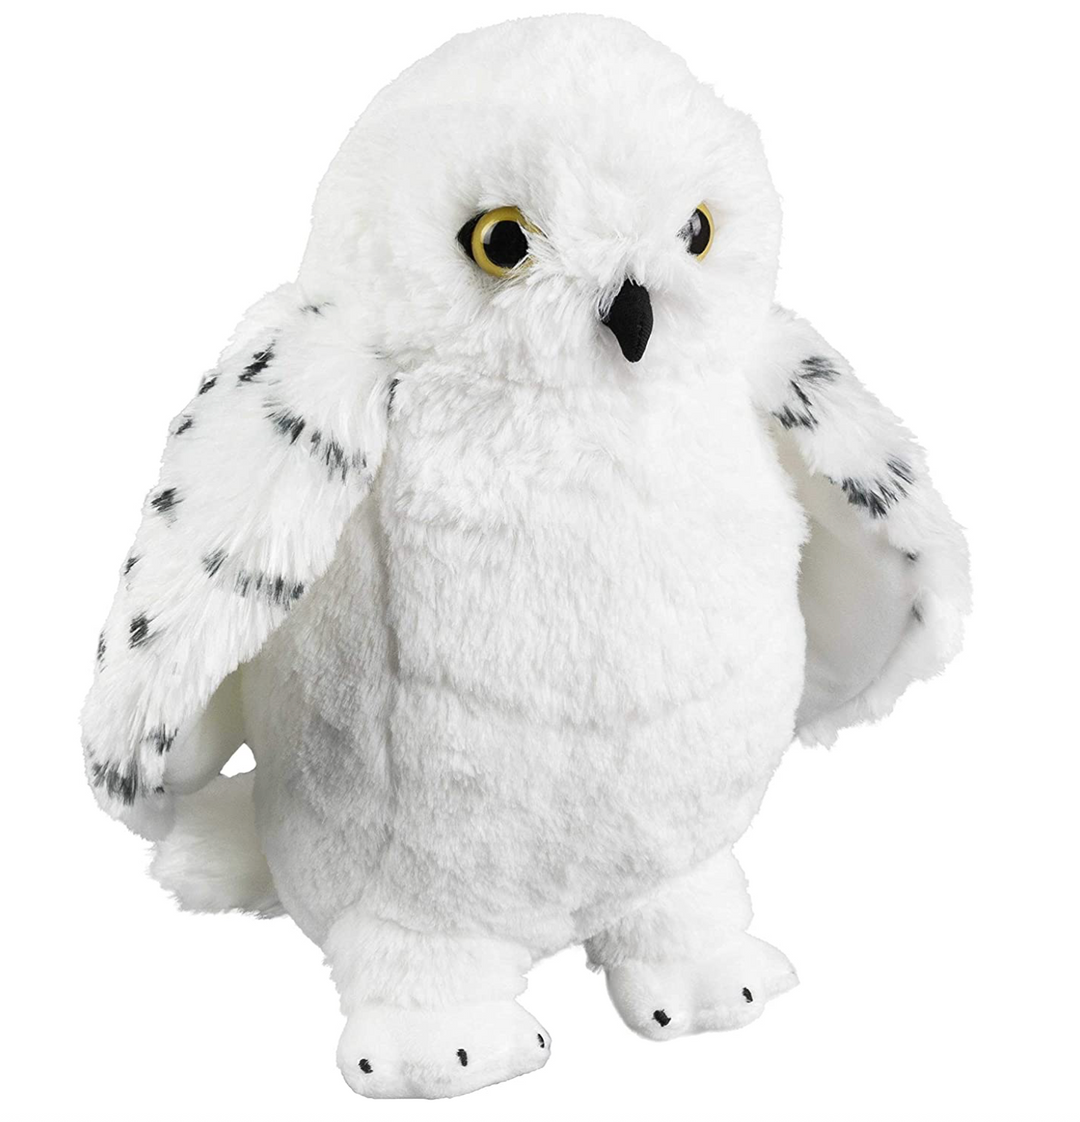 Official Harry Potter Hedwig Plush